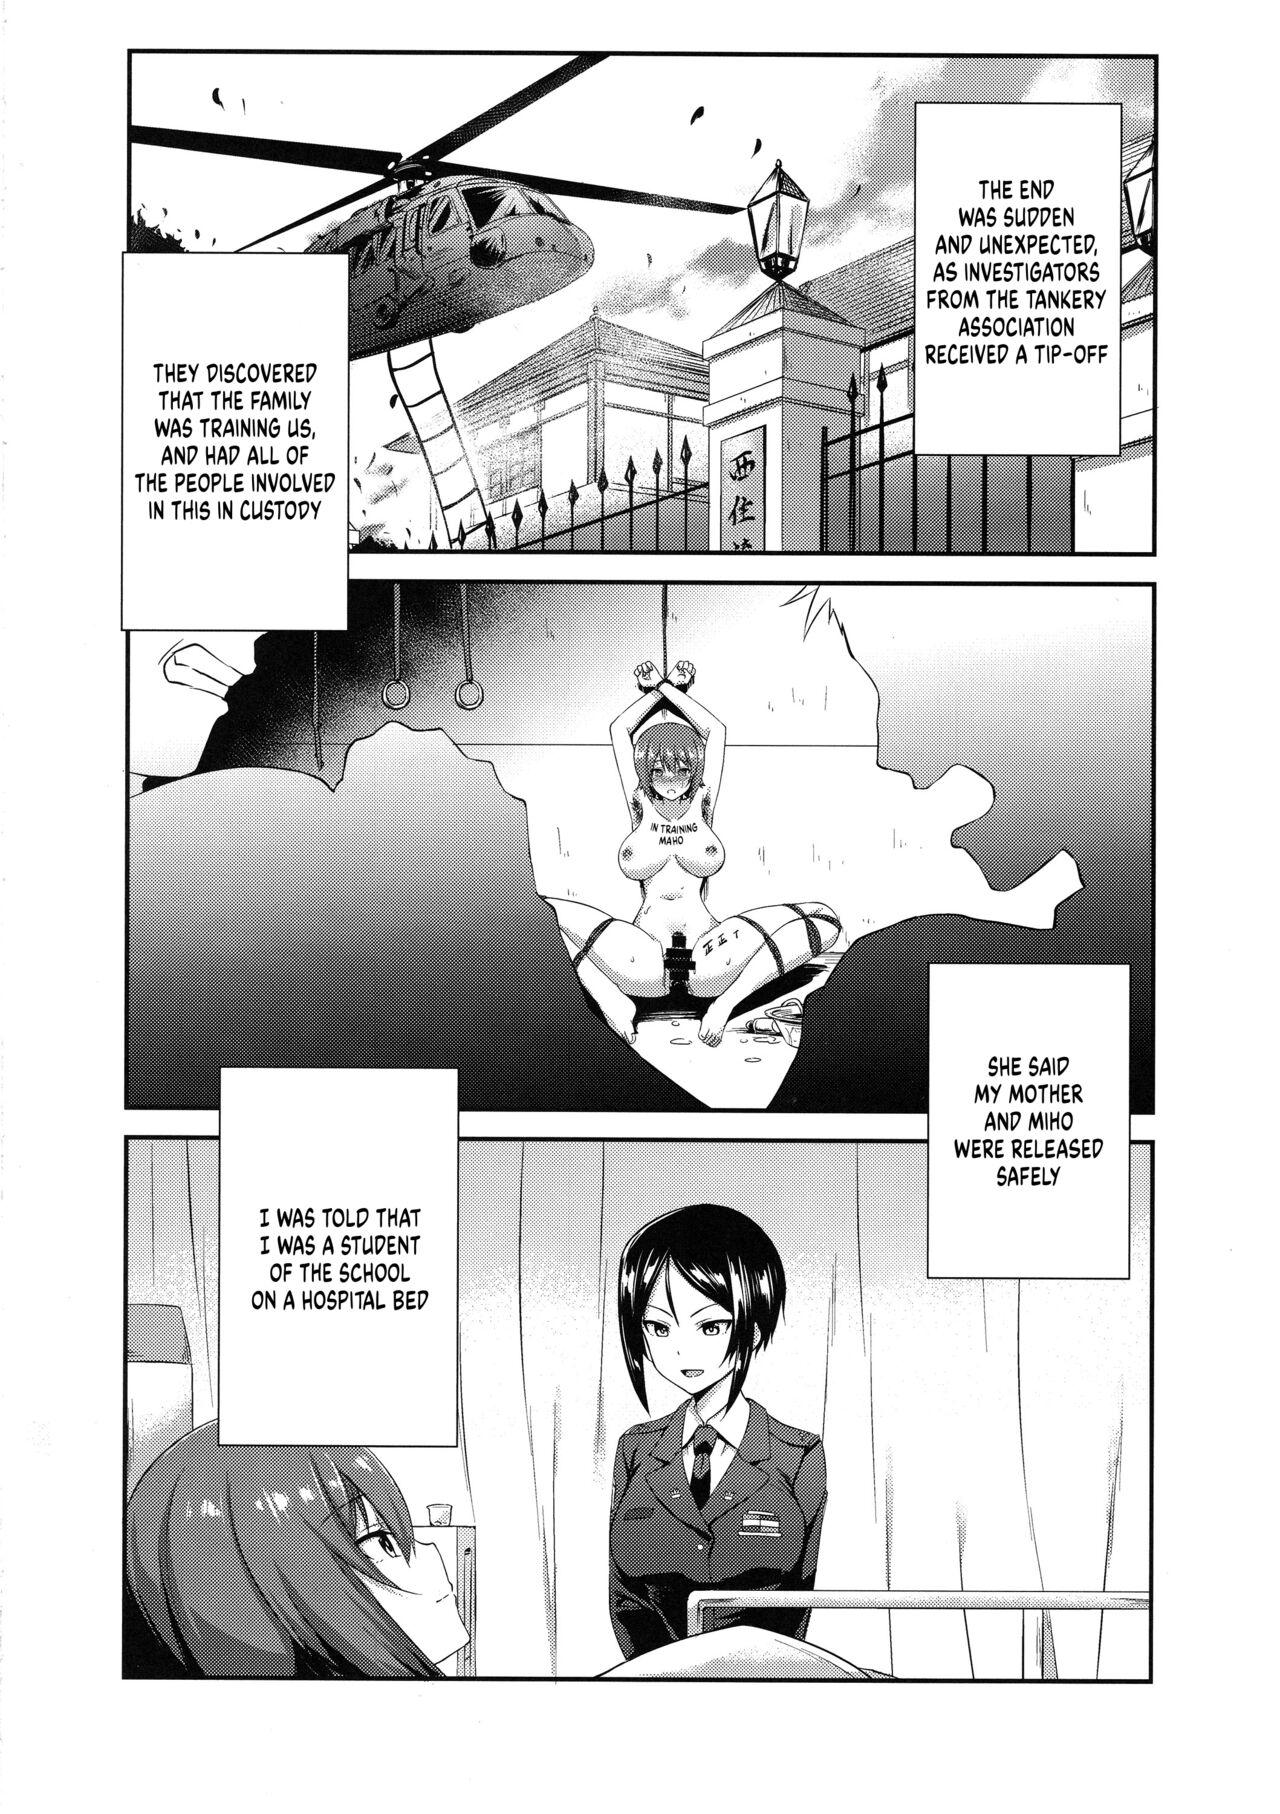 Tiny Girl The Way How a Matriarch is Brought Up - Maho's Case, Top - Girls und panzer Teenage Sex - Page 5